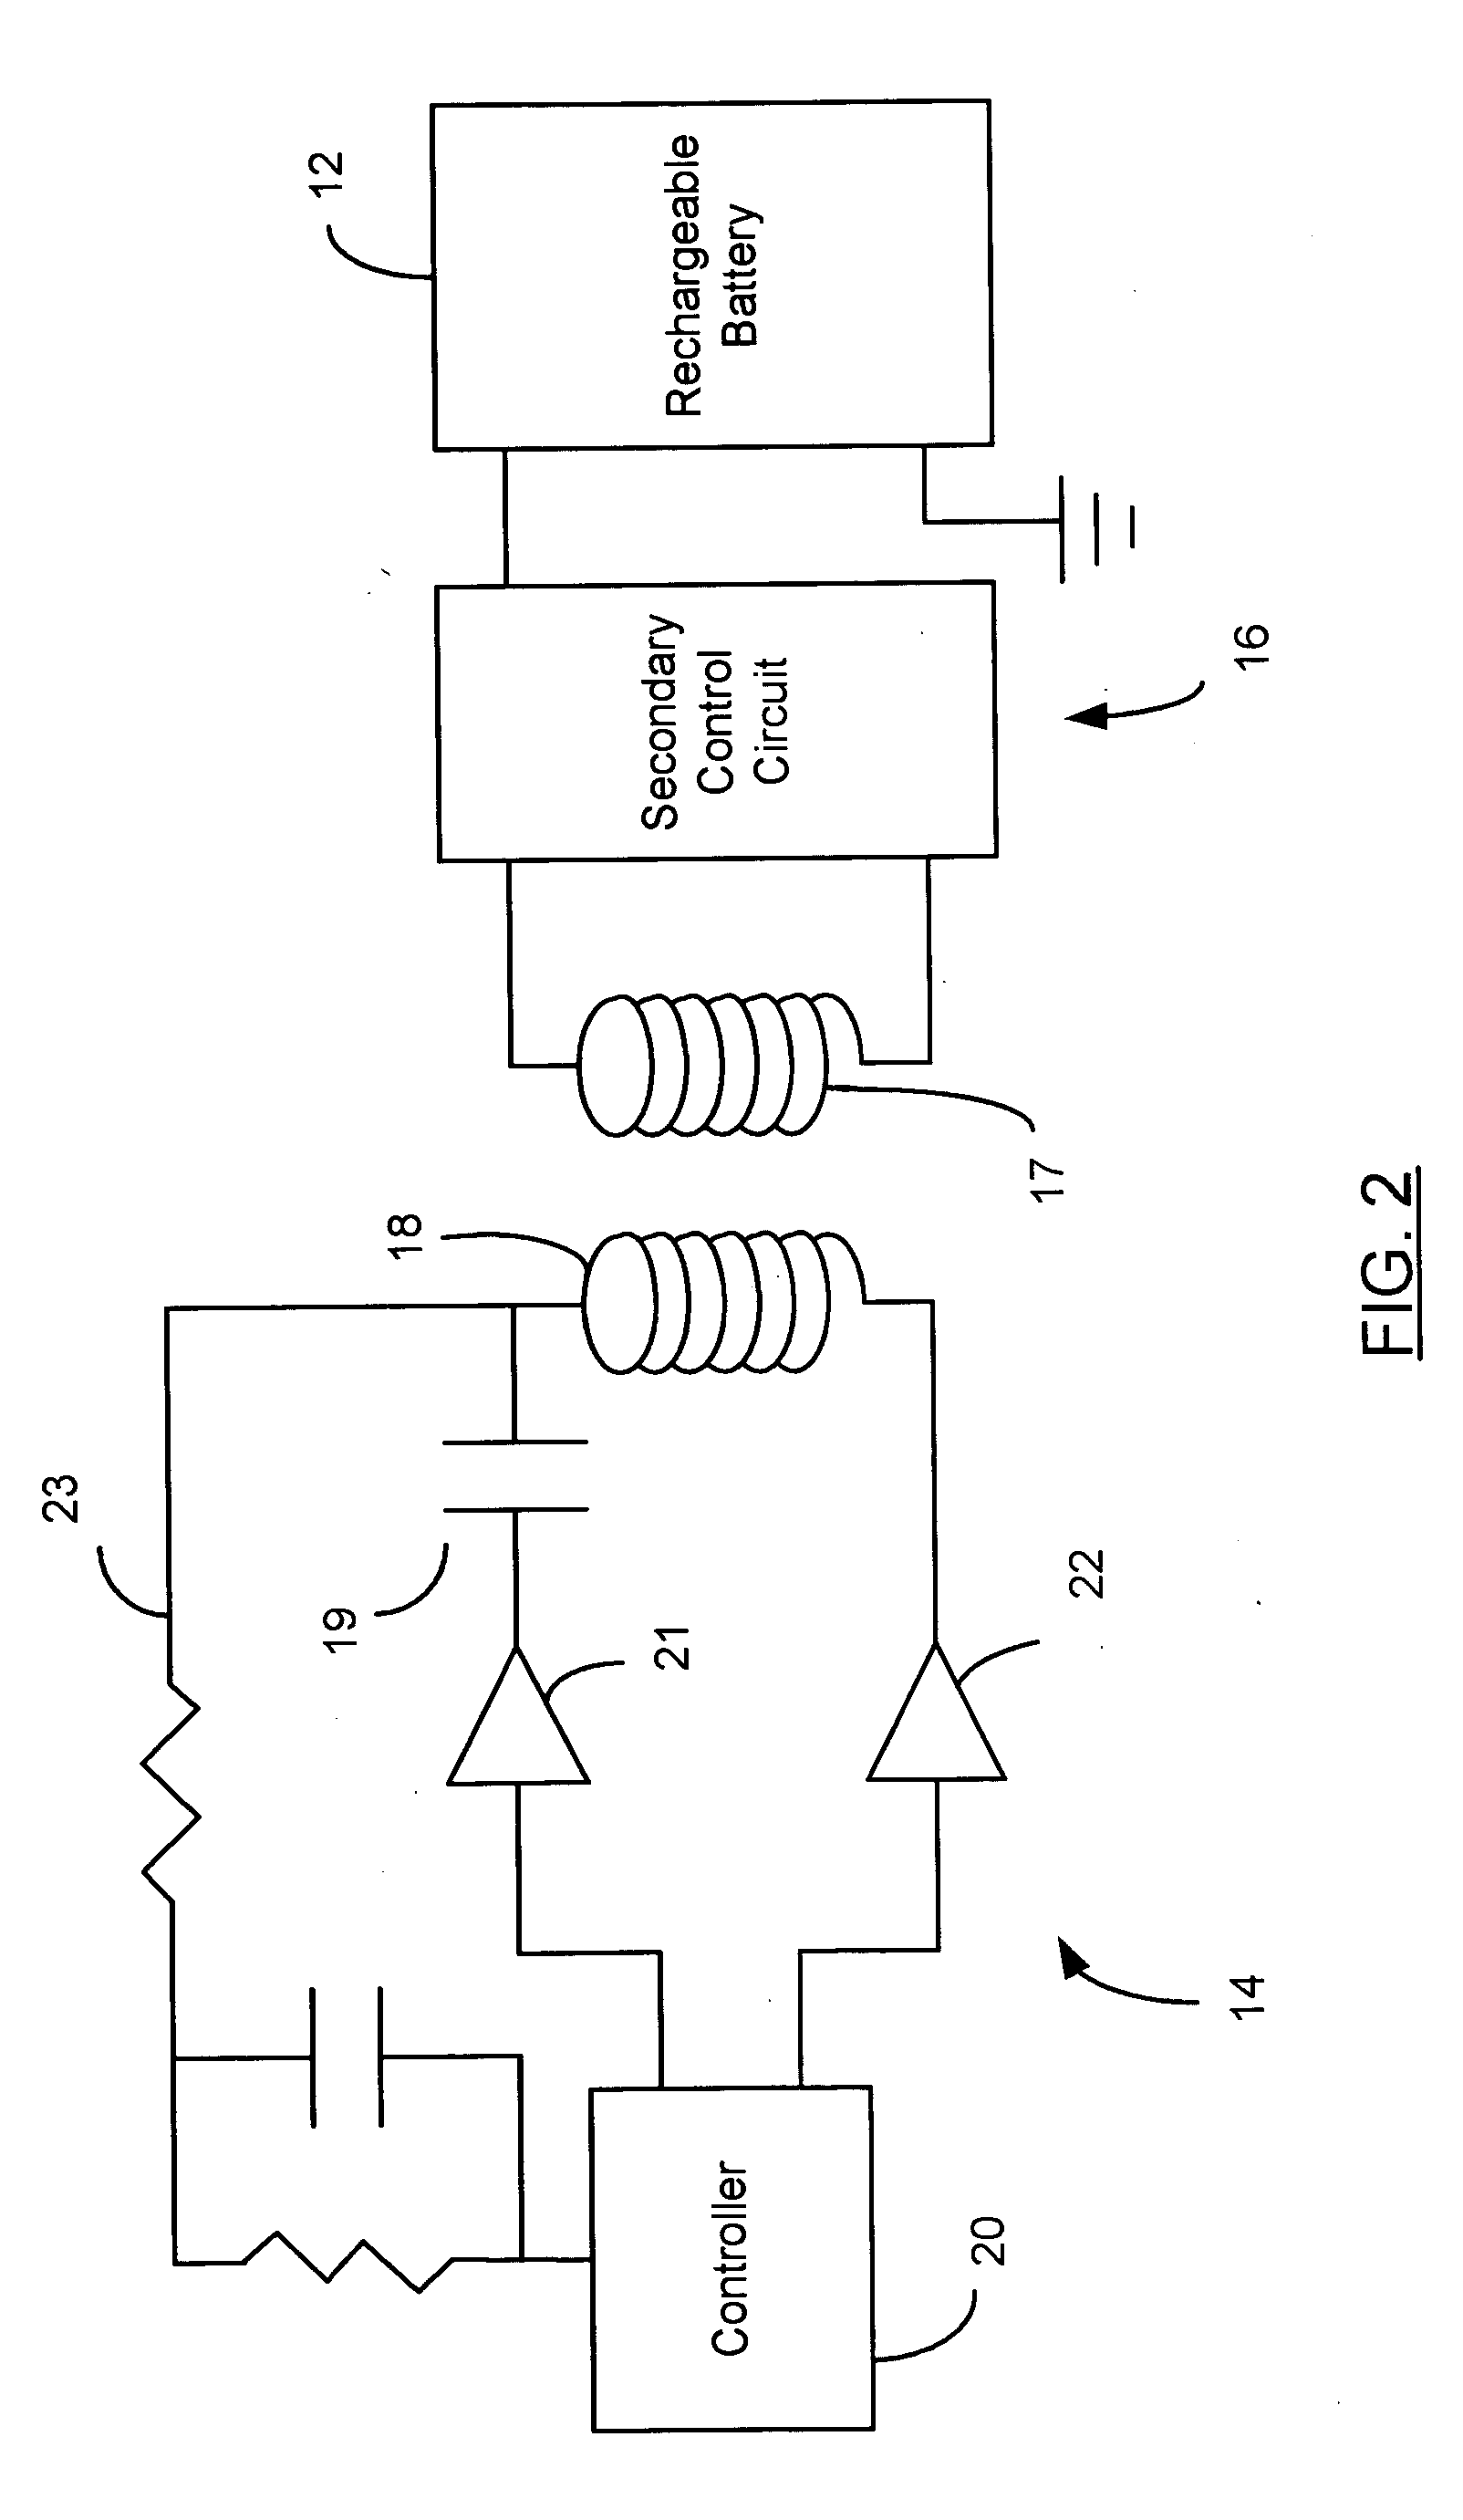 Efficient inductive battery recharging system